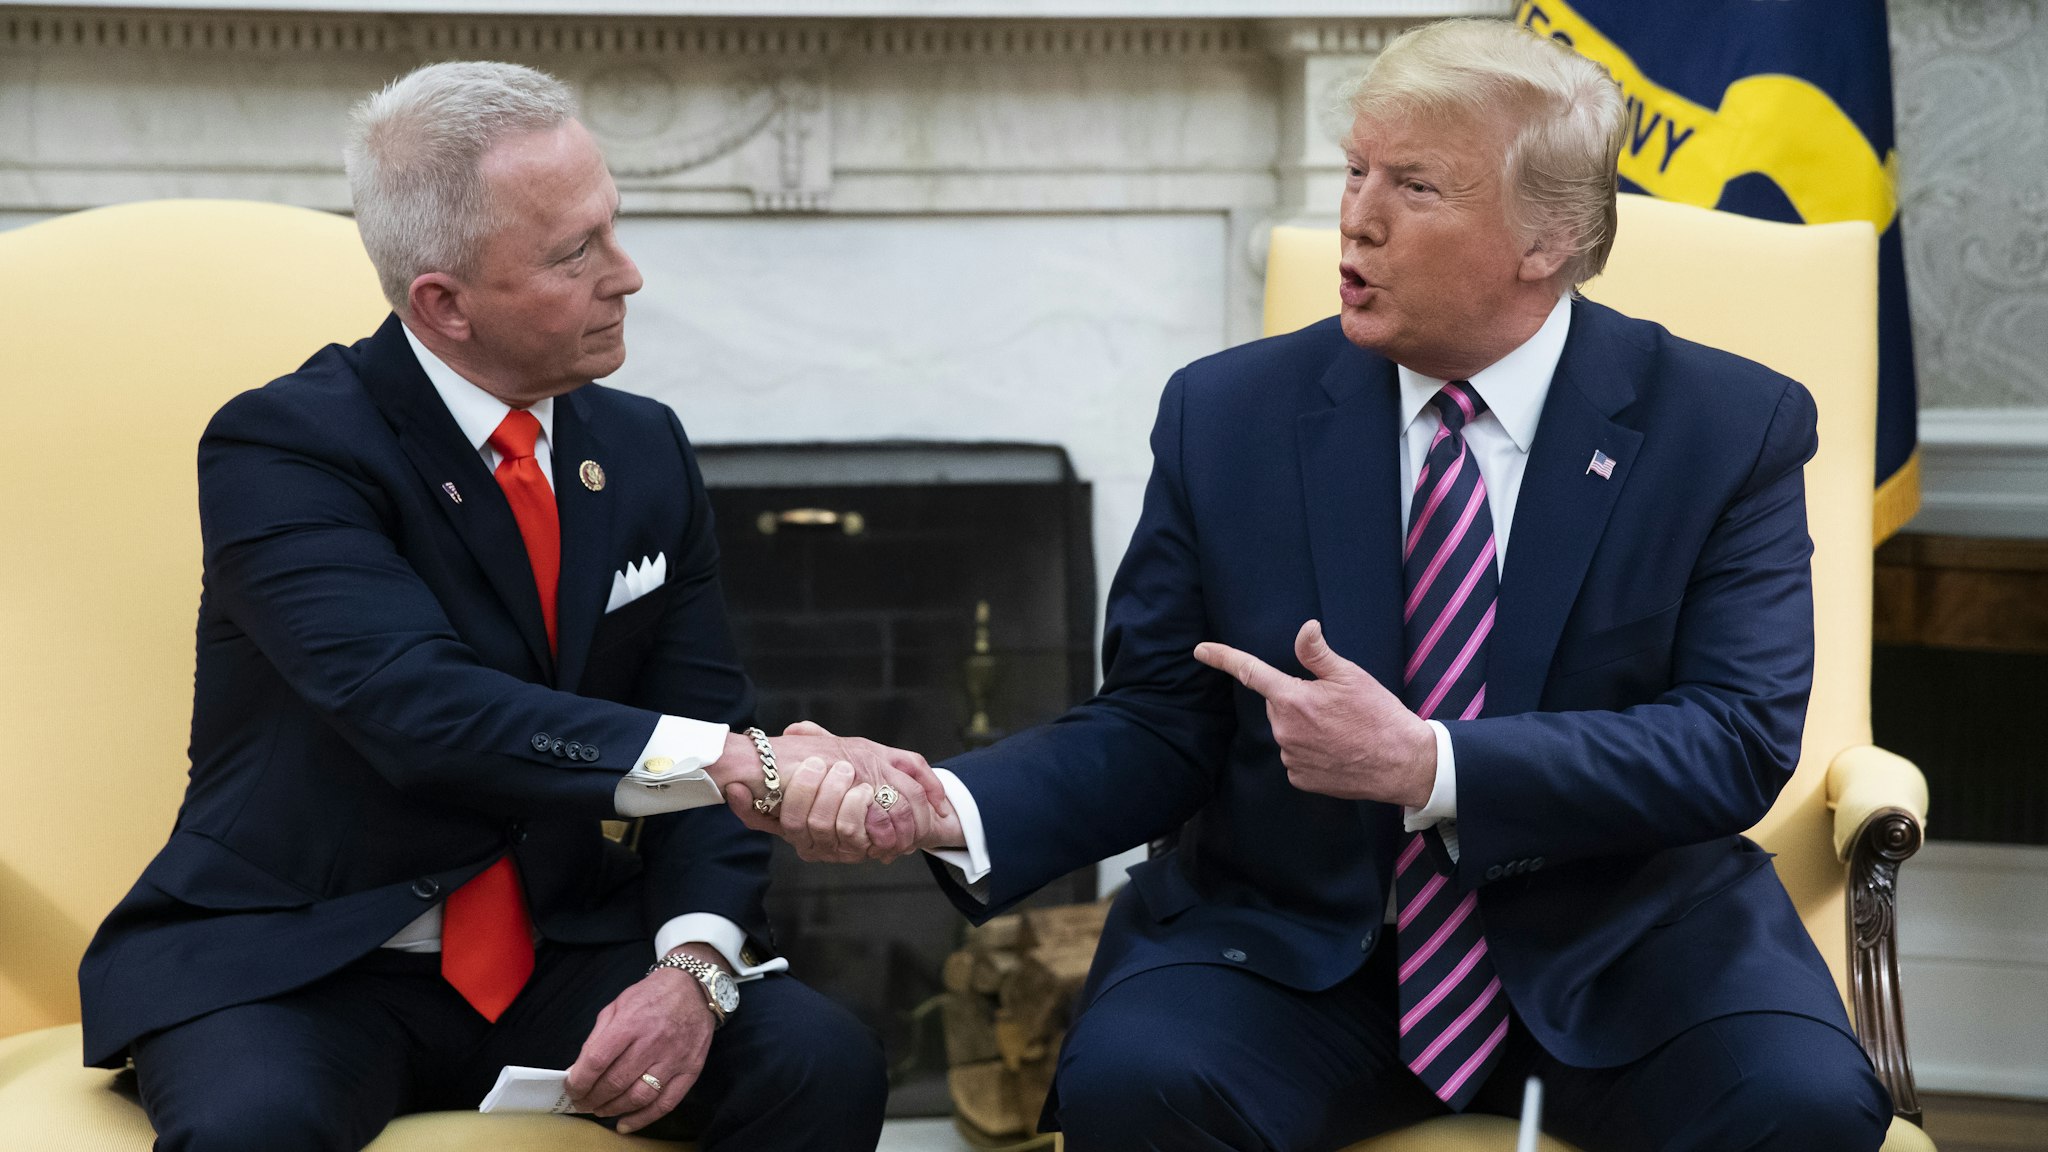 U.S. President Donald Trump shakes hands with Representative Jeff Van Drew, a Democrat from New Jersey, left, in the Oval Office of the White House in Washington, D.C., U.S., on Thursday, Dec. 19, 2019. Trump announced that Van Drew is switching parties to become a Republican after he voted against impeaching the president on Wednesday.